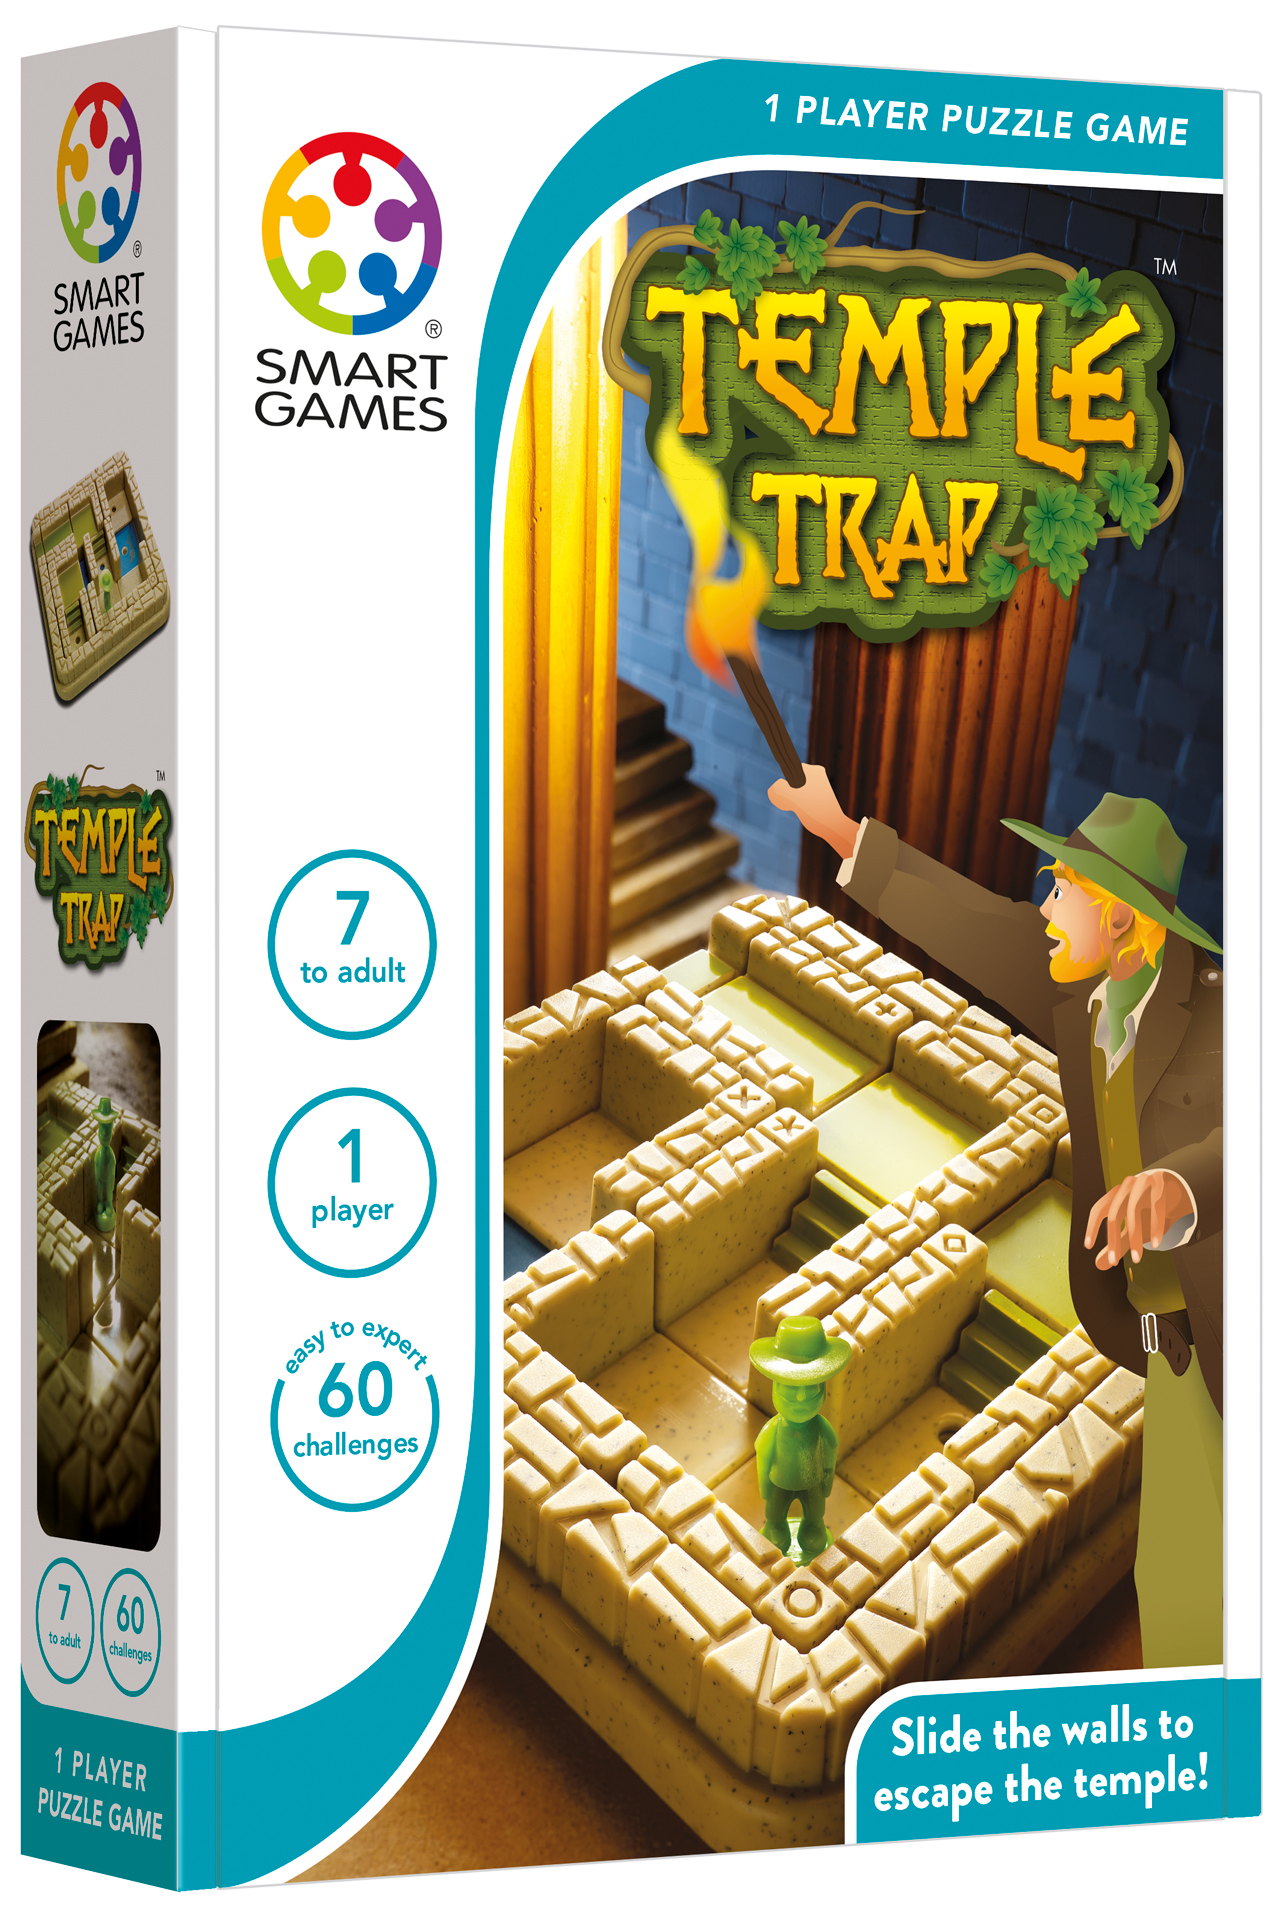 Smart Games Challenge 1 - PC Review and Full Download